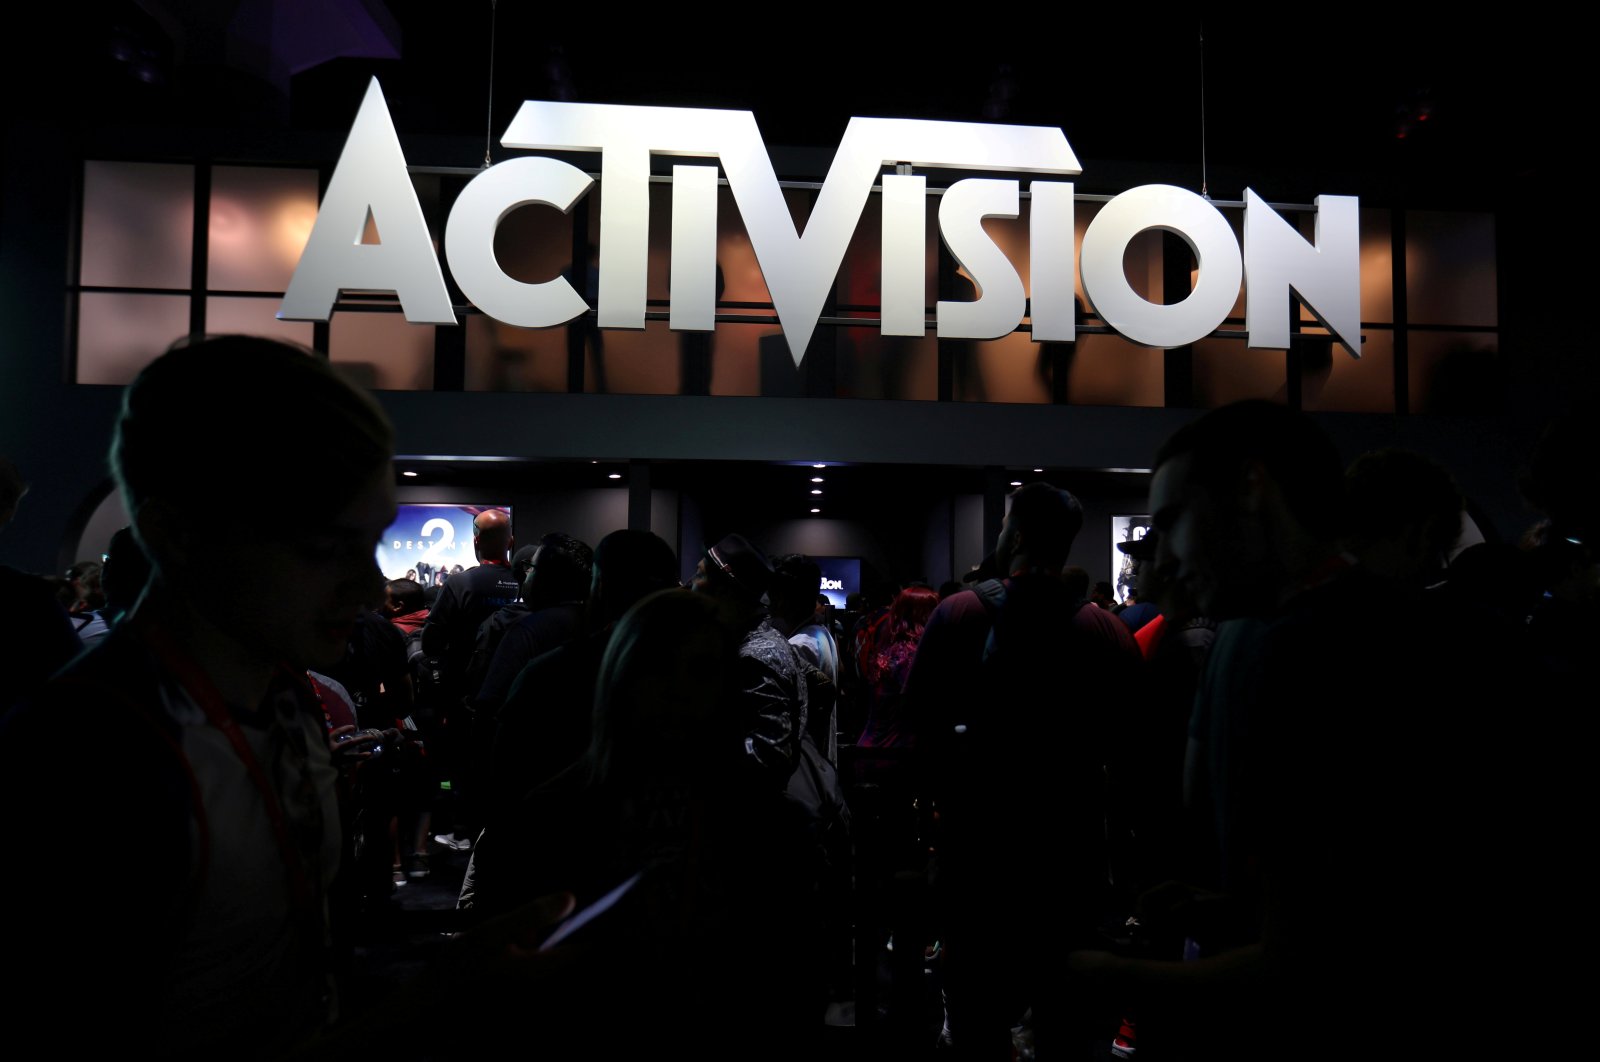 The Activision booth is shown at the E3 2017 Electronic Entertainment Expo in Los Angeles, California, U.S., June 13, 2017. (Reuters Photo)